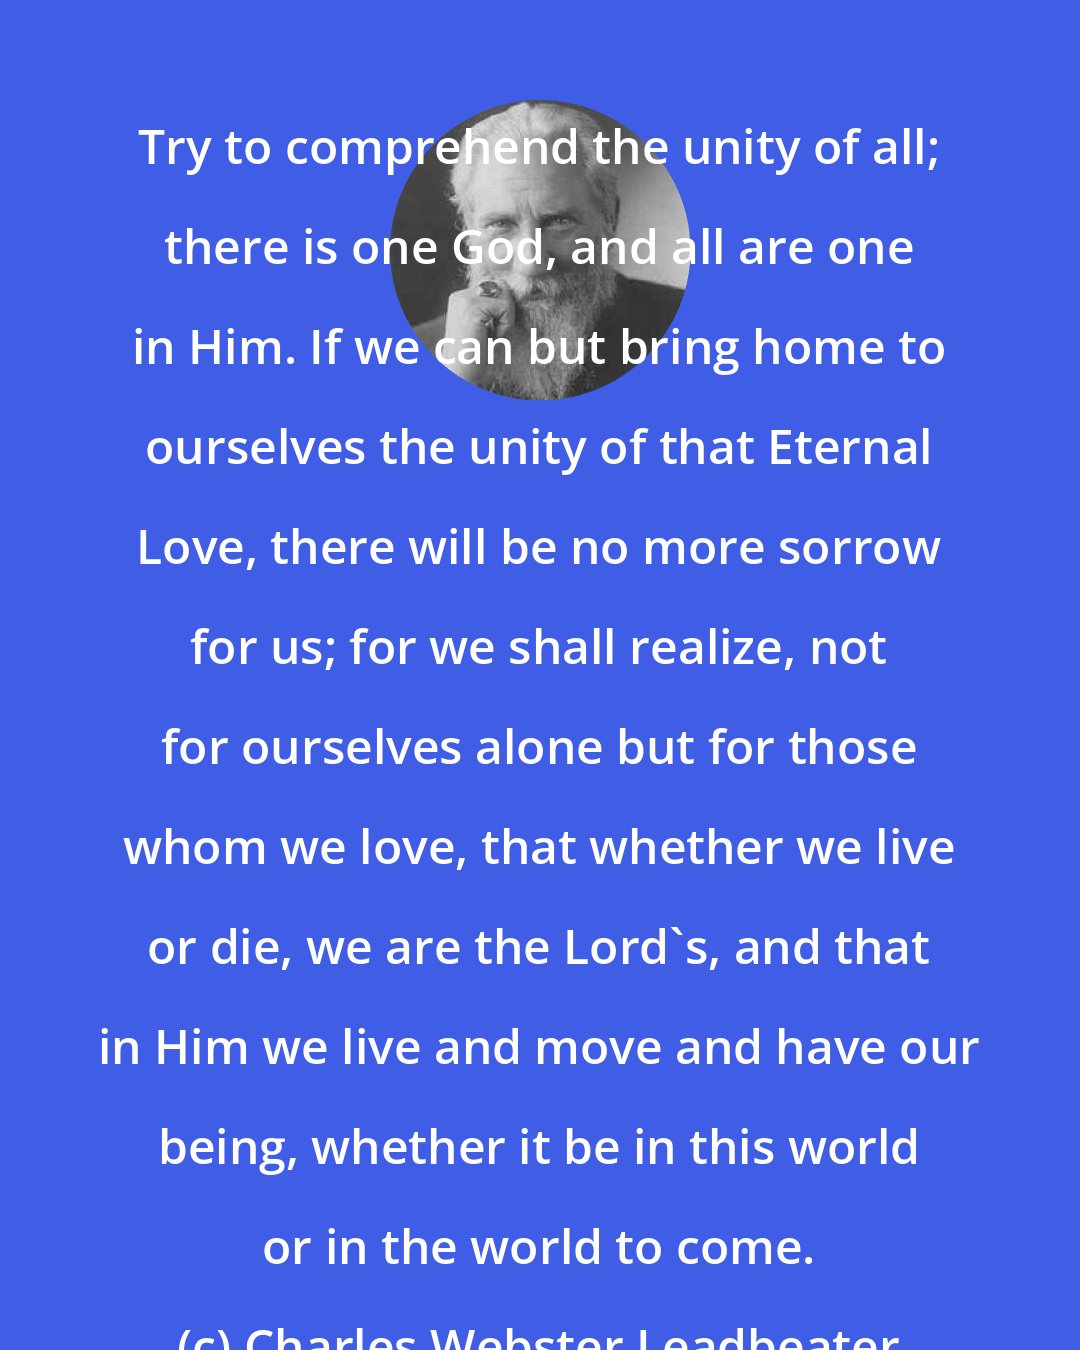 Charles Webster Leadbeater: Try to comprehend the unity of all; there is one God, and all are one in Him. If we can but bring home to ourselves the unity of that Eternal Love, there will be no more sorrow for us; for we shall realize, not for ourselves alone but for those whom we love, that whether we live or die, we are the Lord's, and that in Him we live and move and have our being, whether it be in this world or in the world to come.